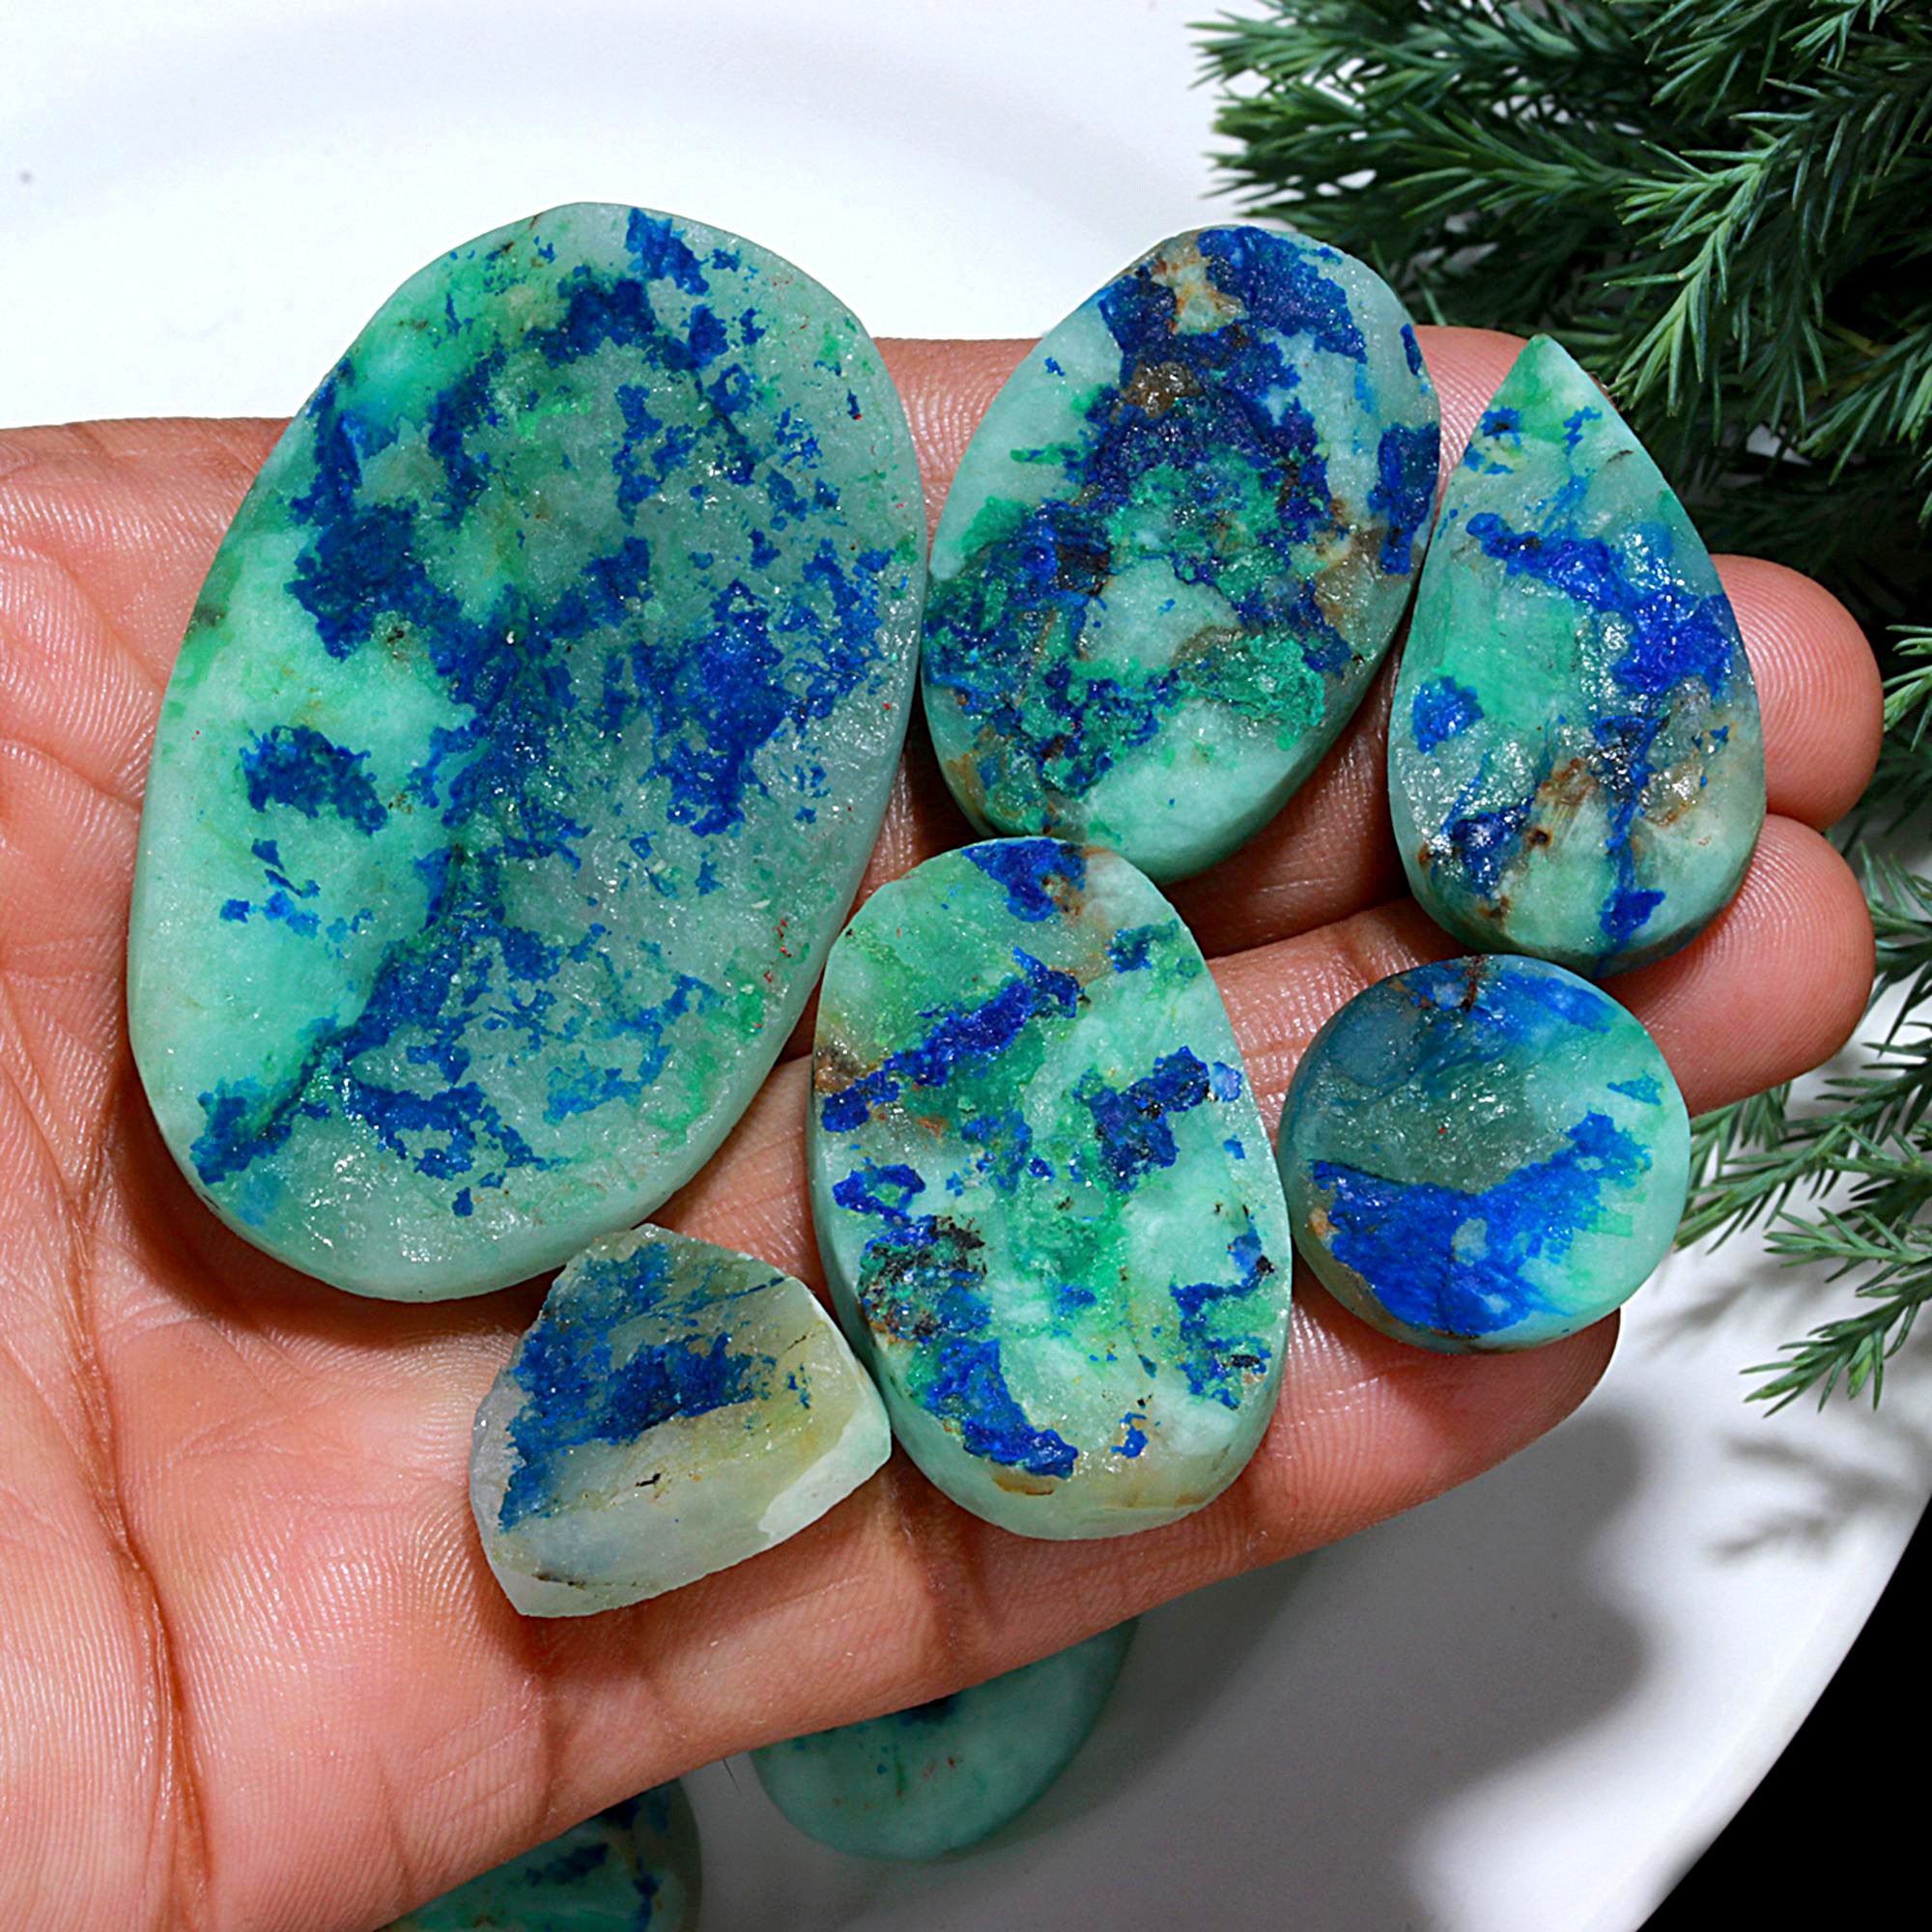 17 Pcs 580.Cts Natural Azurite Druzy Unpolished Loose Cabochon Gemstone For Jewelry Wholesale Lot Size 53x33 19x20mm